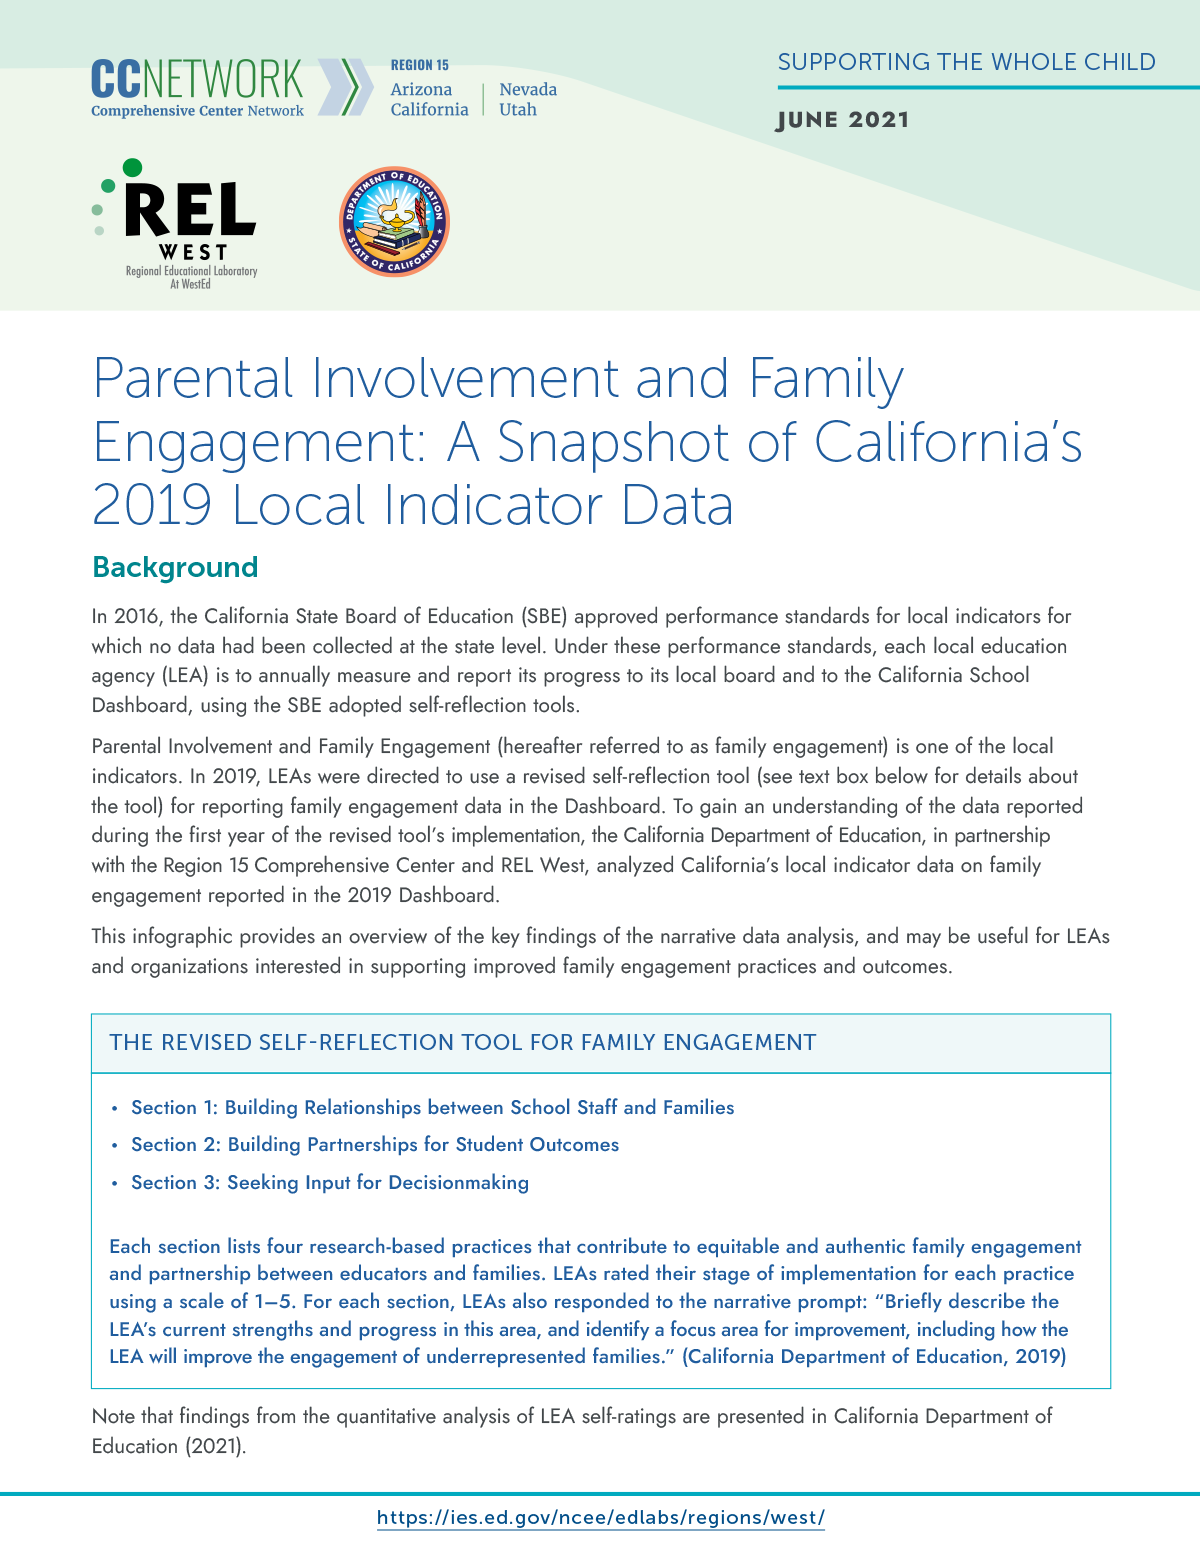 Parental Involvement and Family Engagement: A Snapshot of California’s 2019 Local Indicator Data